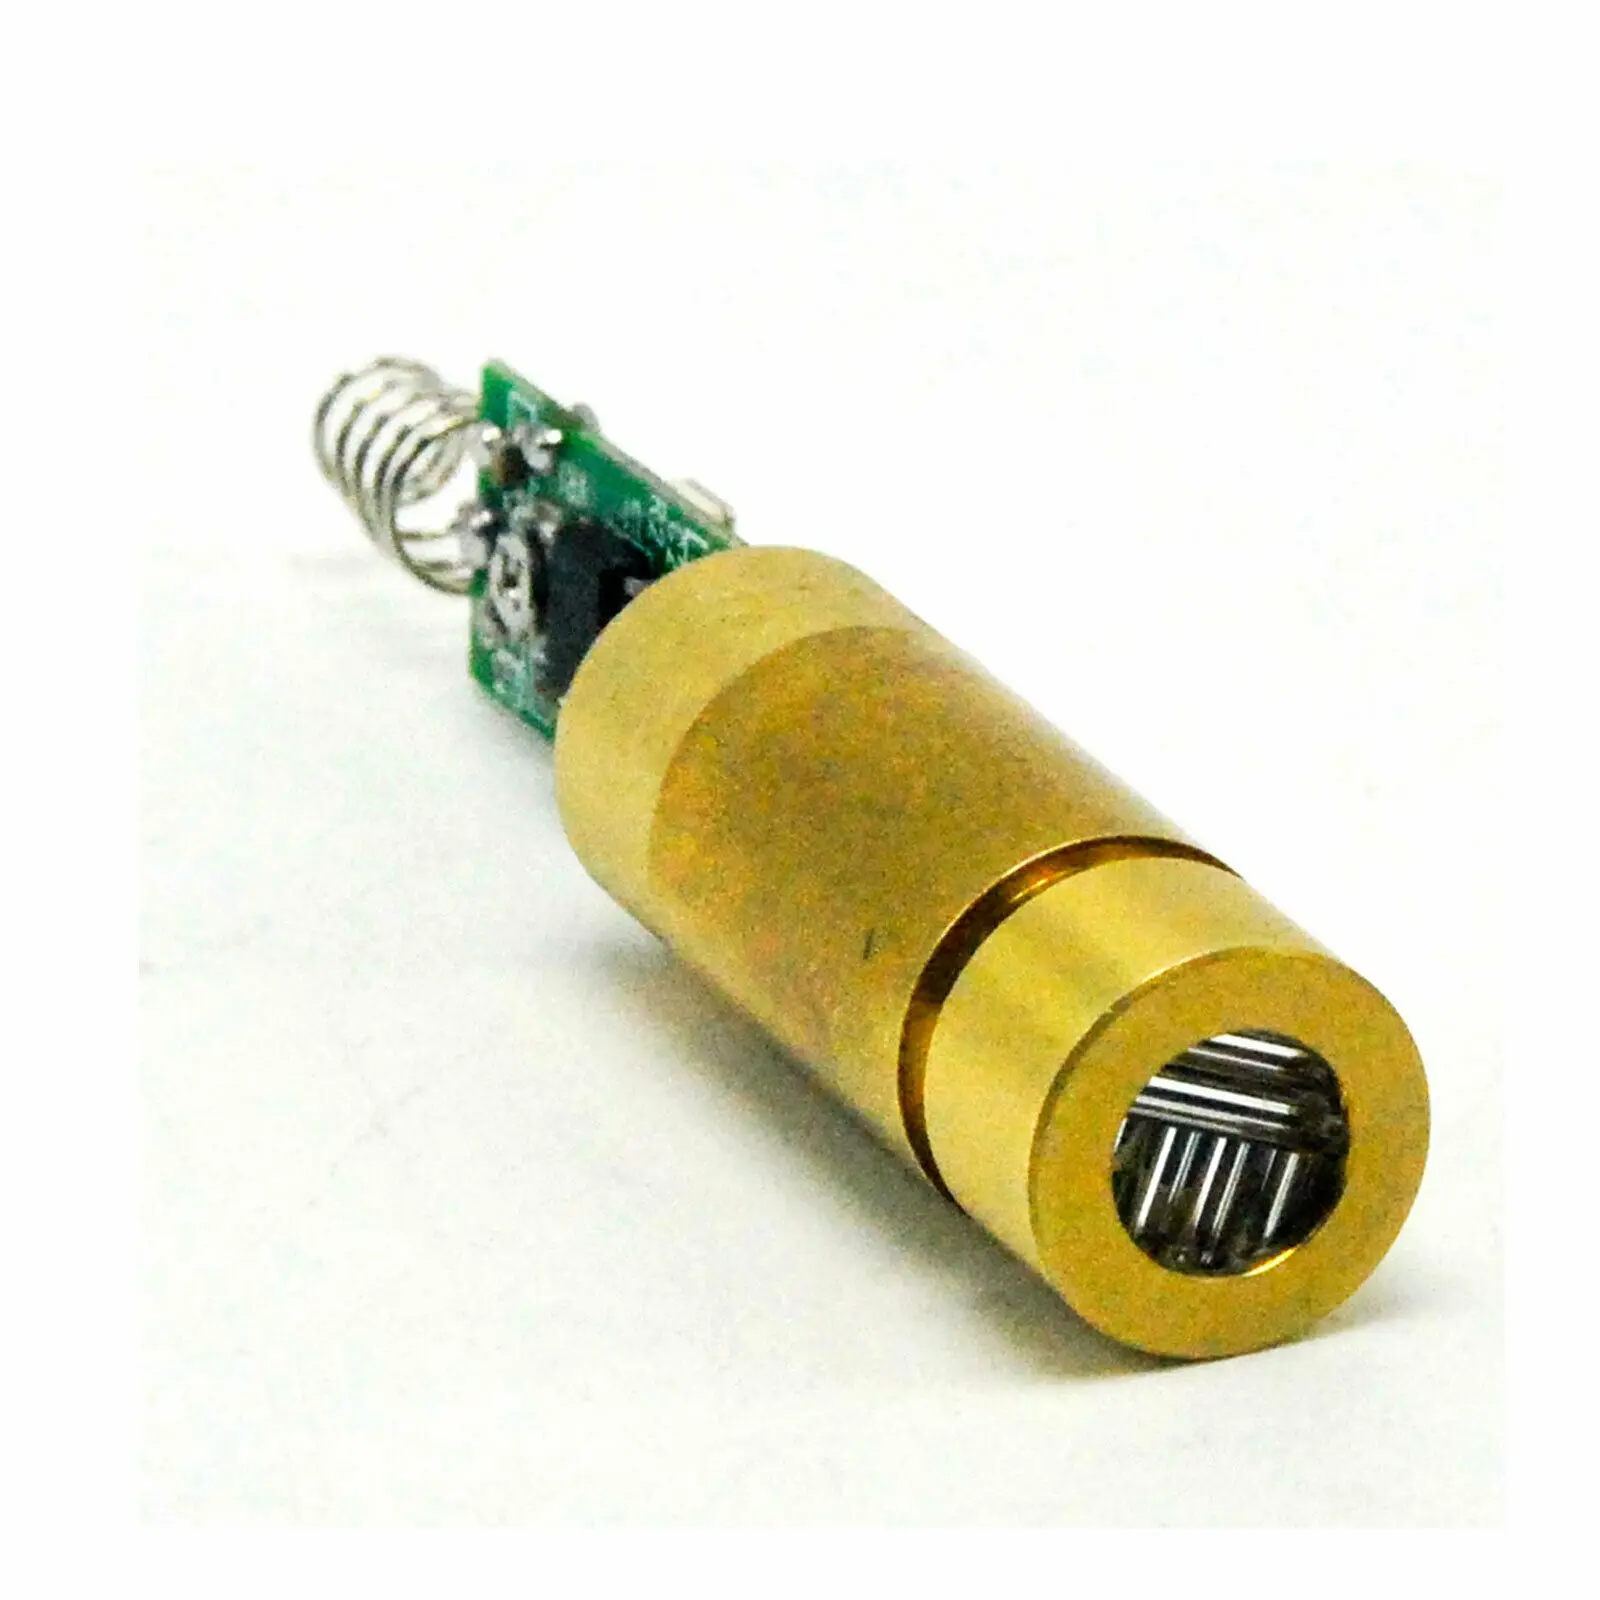 Brass 650nm 100mW Red Laser Cross Diode Module with Driver INDUSTRIAL / LAB 100mw 650nm red dot line cross focusable laser module alignment locator with power supply